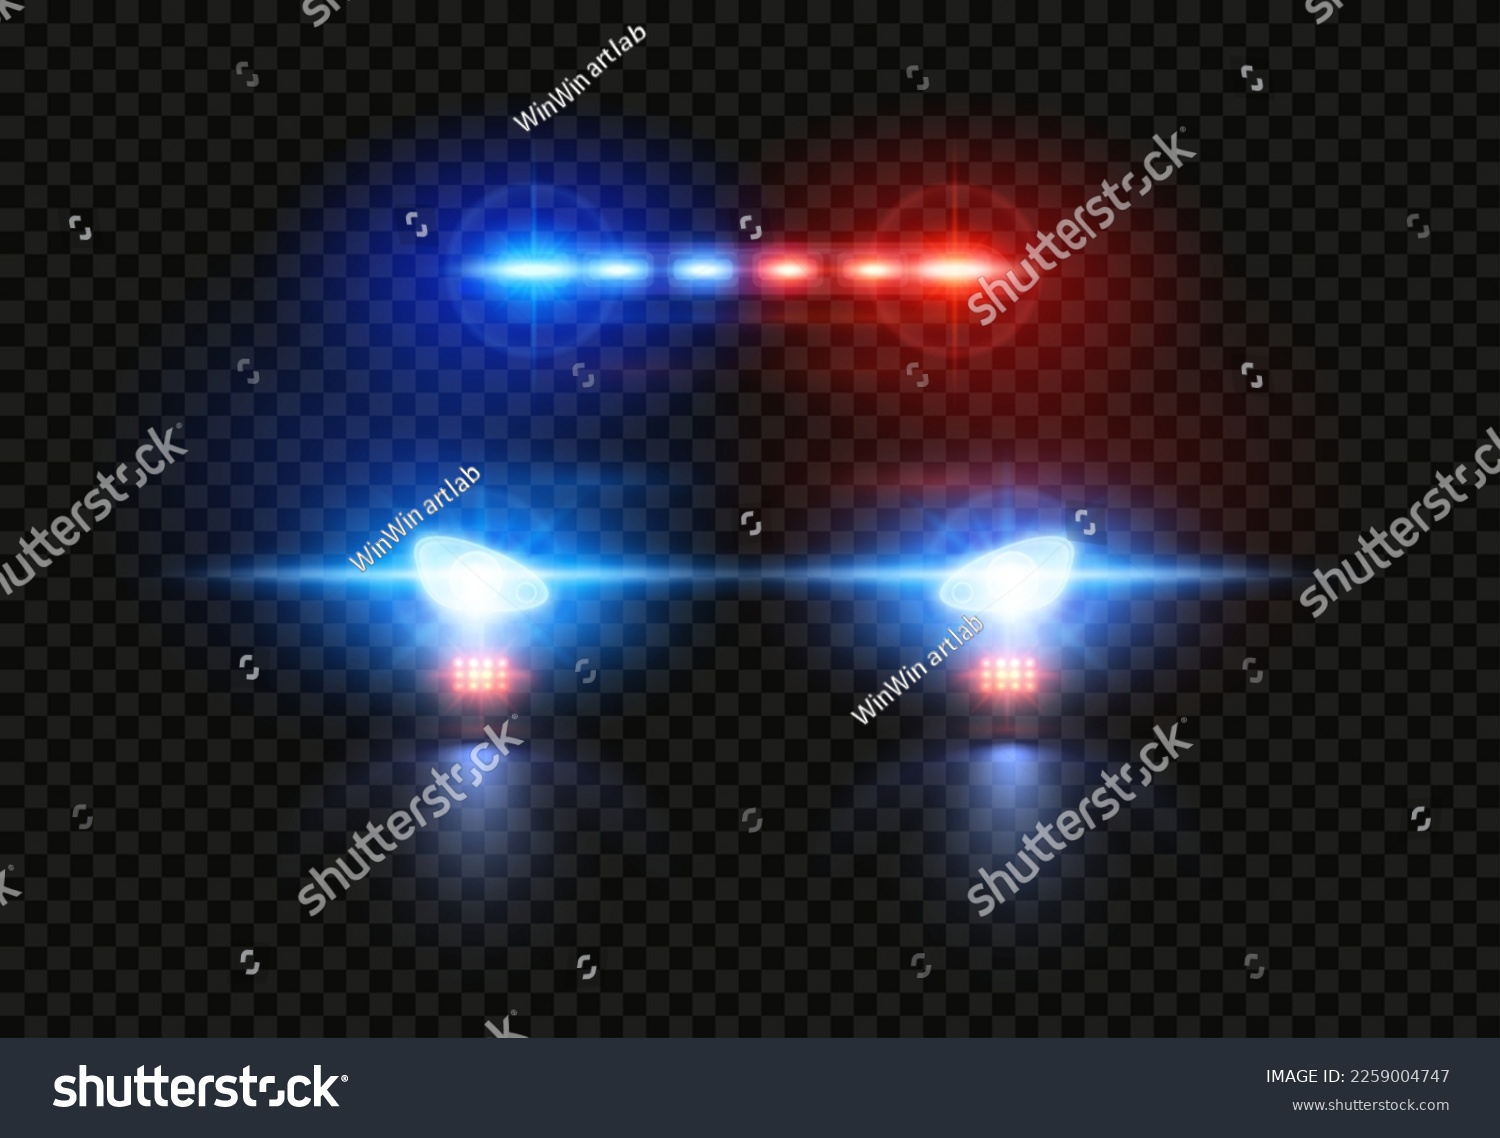 SVG of Police car headlights. Emergency flashing light, pursuit light siren and patrol cop vehicle glow vector overlay. Security transport with shining bright headlamps in darkness, enforcement svg